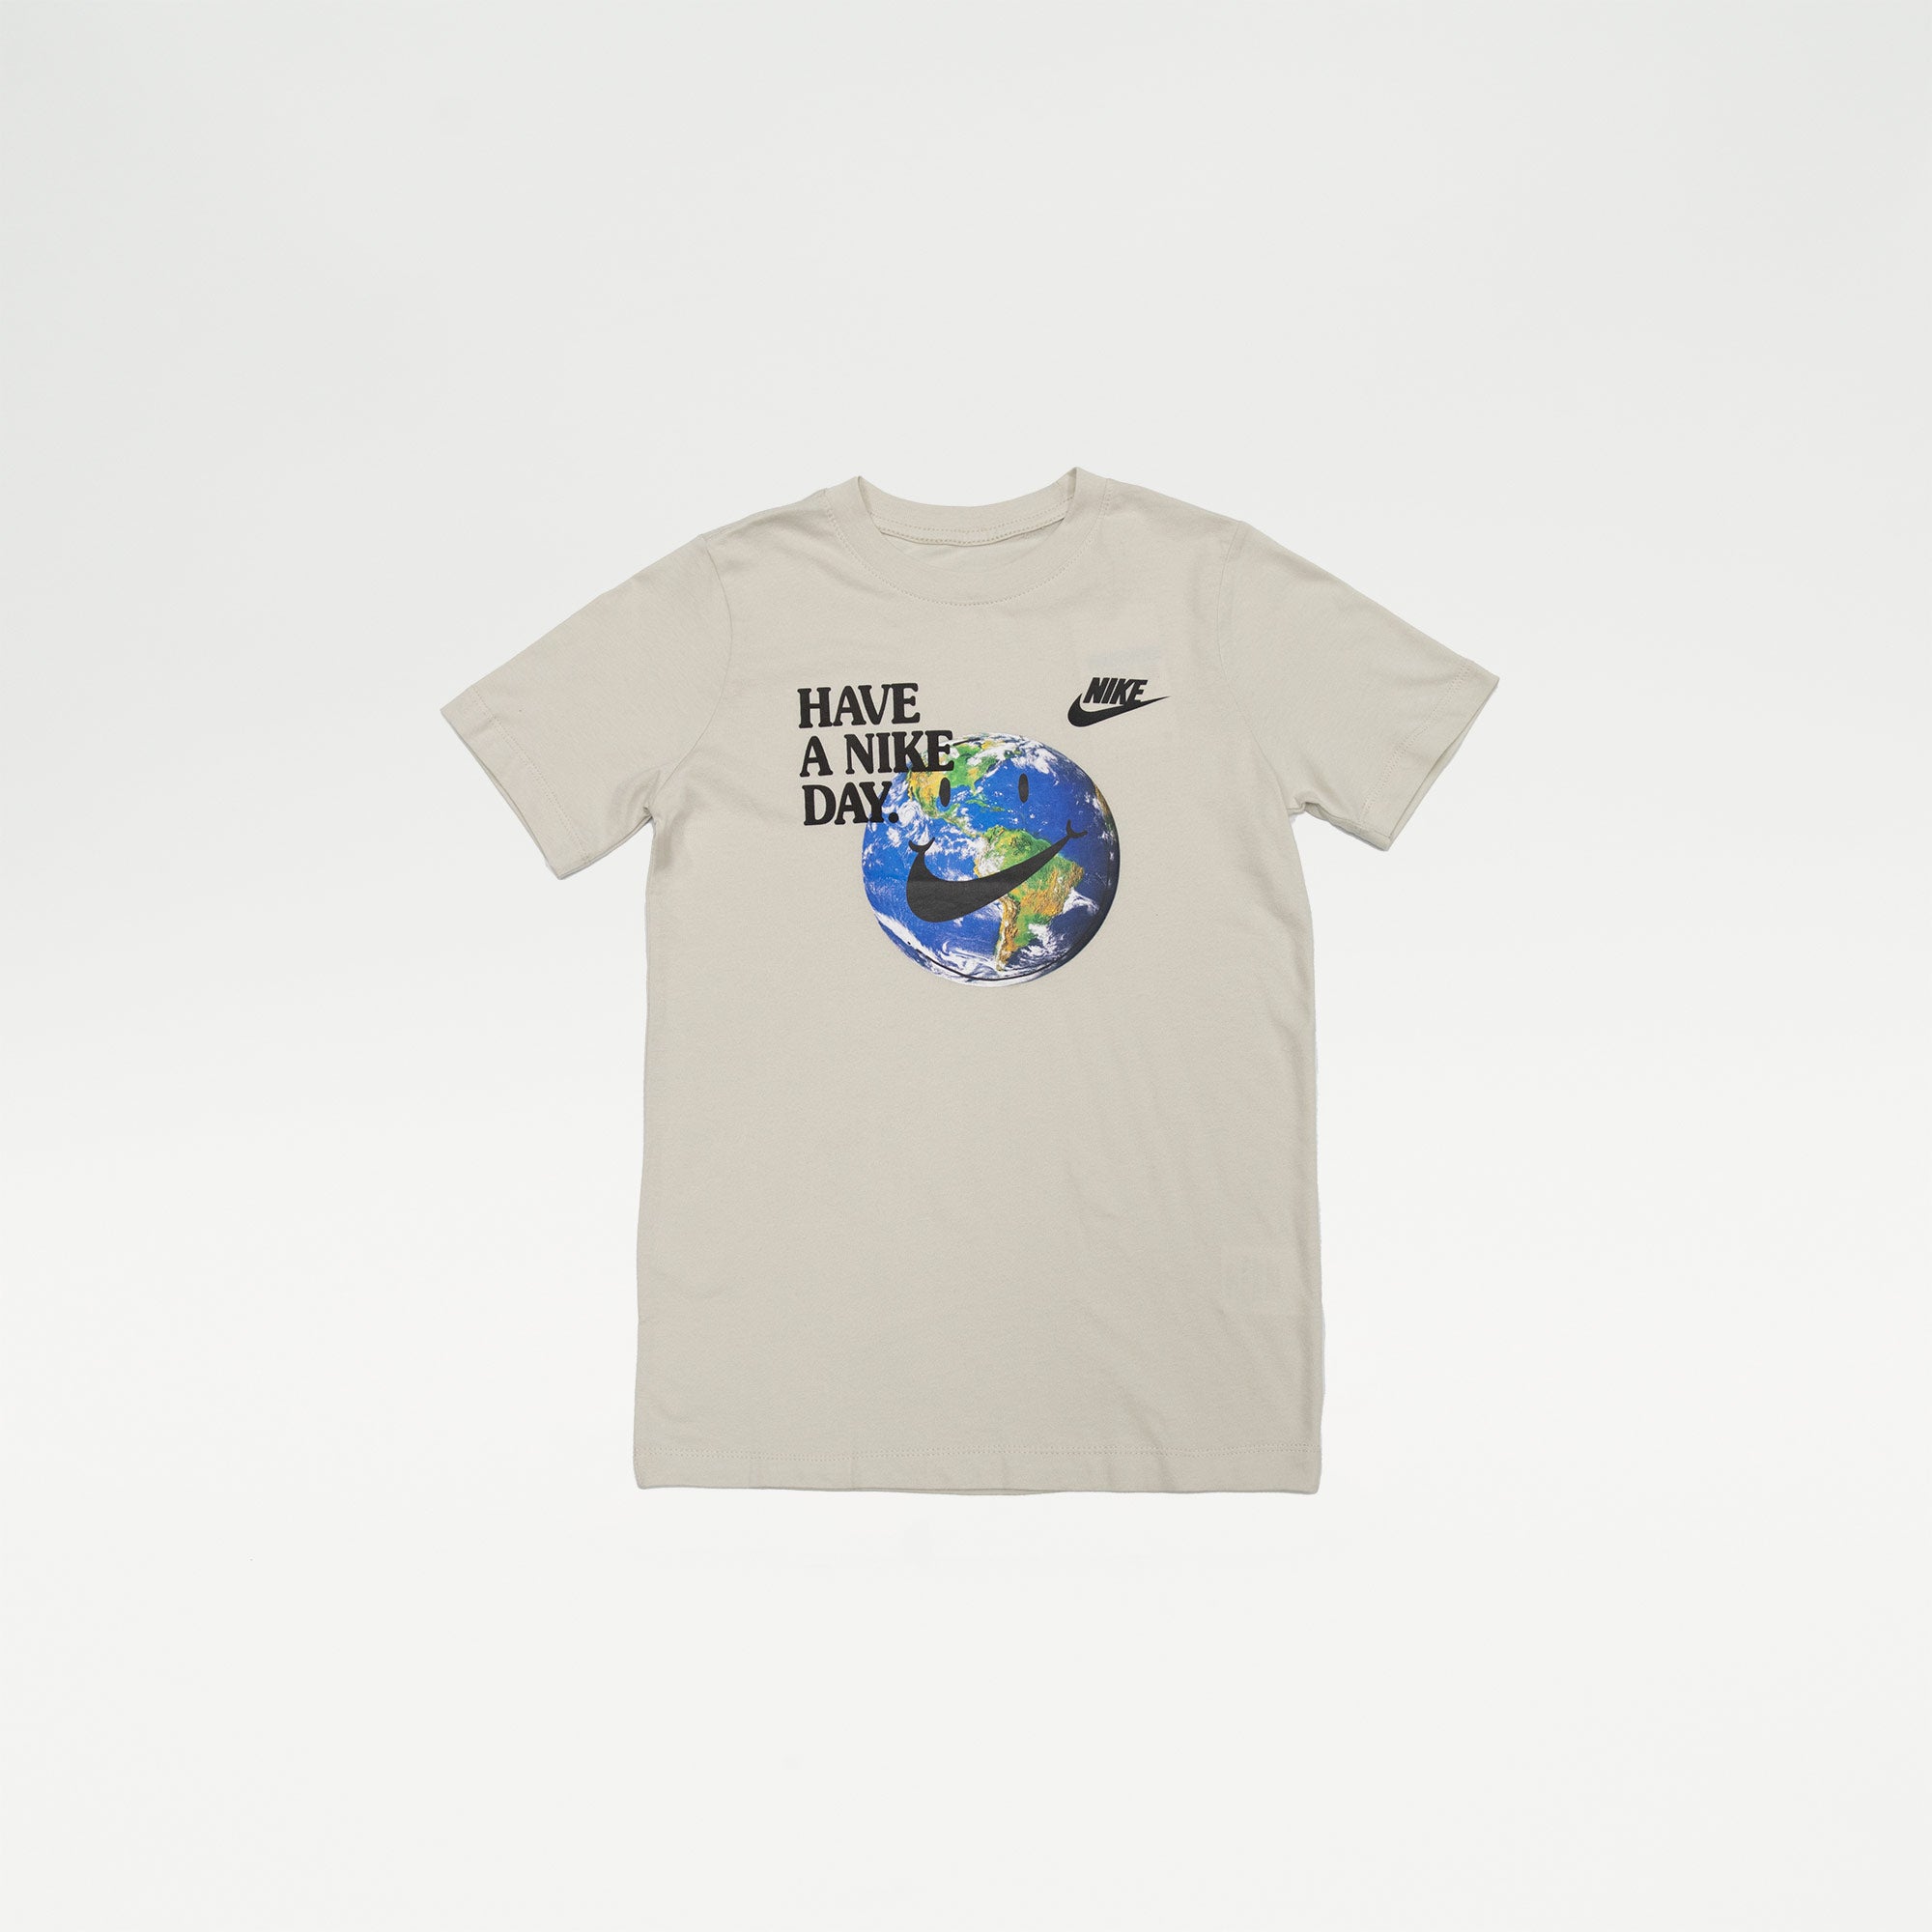 Nike Boys Have a Nike Day Graphic Tee